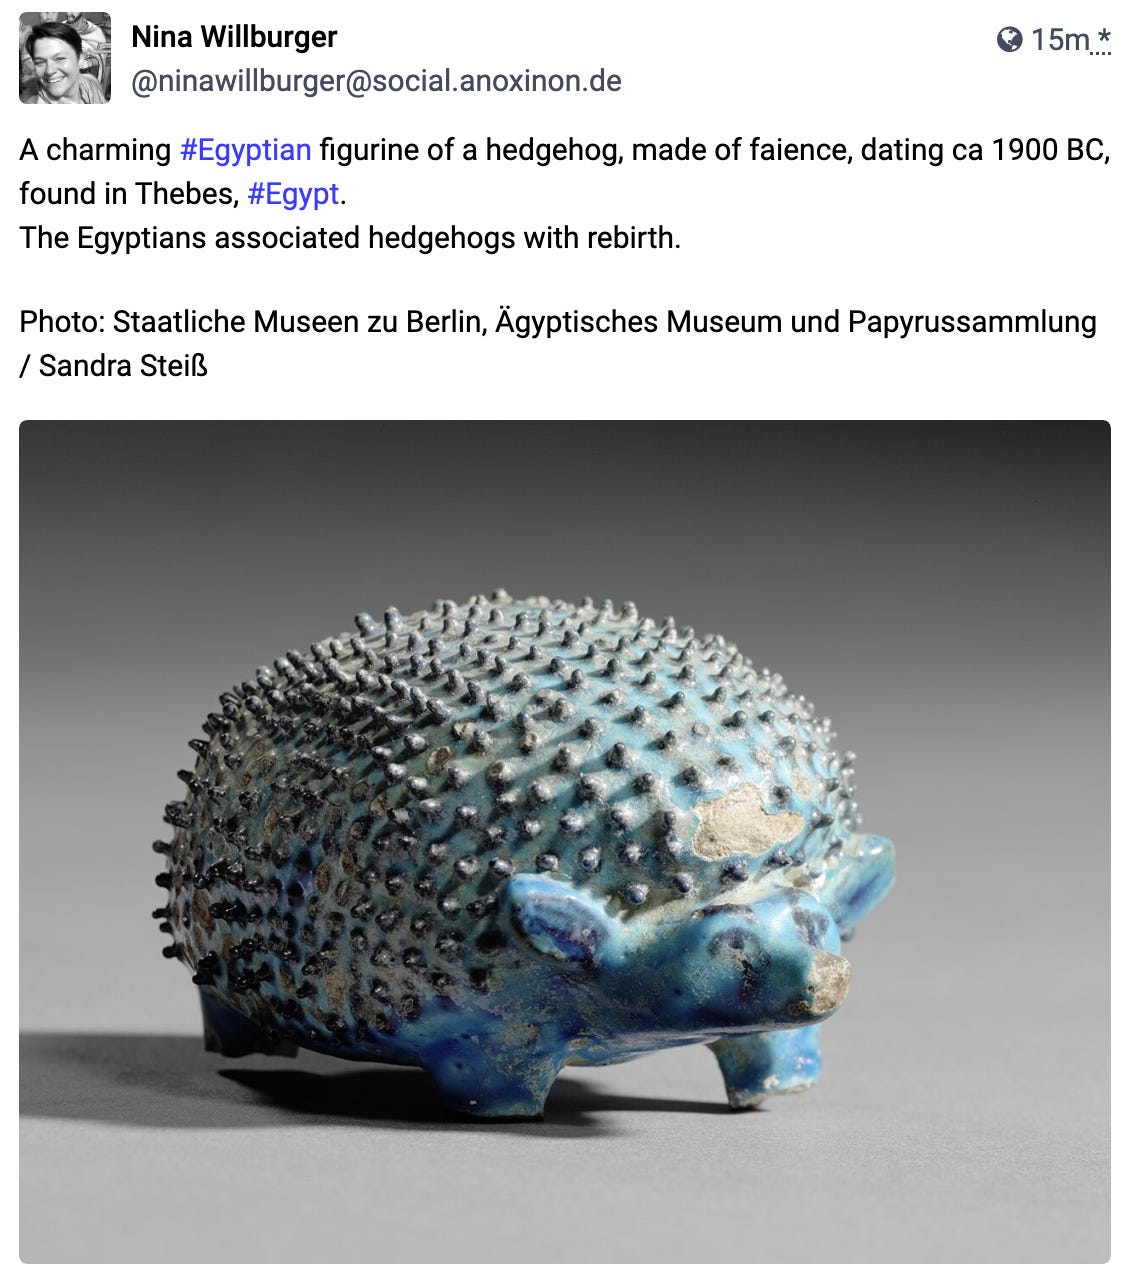 A charming Egyptian figurine of a hedgehog, made of faience, dating ca 1900 BC, found in Thebes. The Egyptians associated hedgehogs with rebirth.